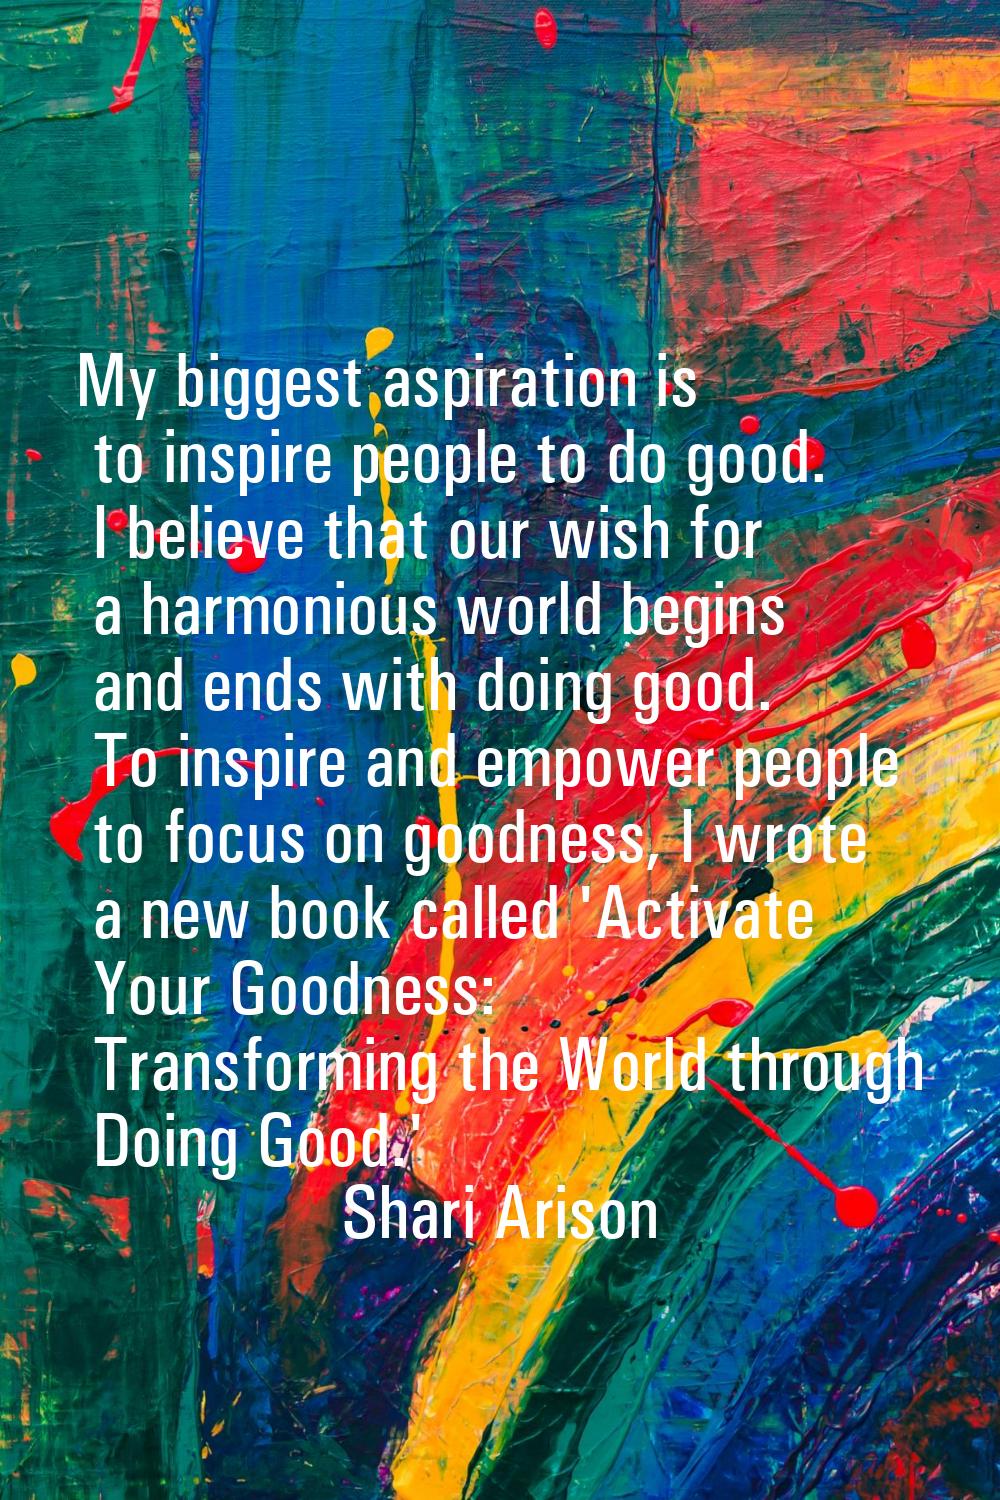 My biggest aspiration is to inspire people to do good. I believe that our wish for a harmonious wor